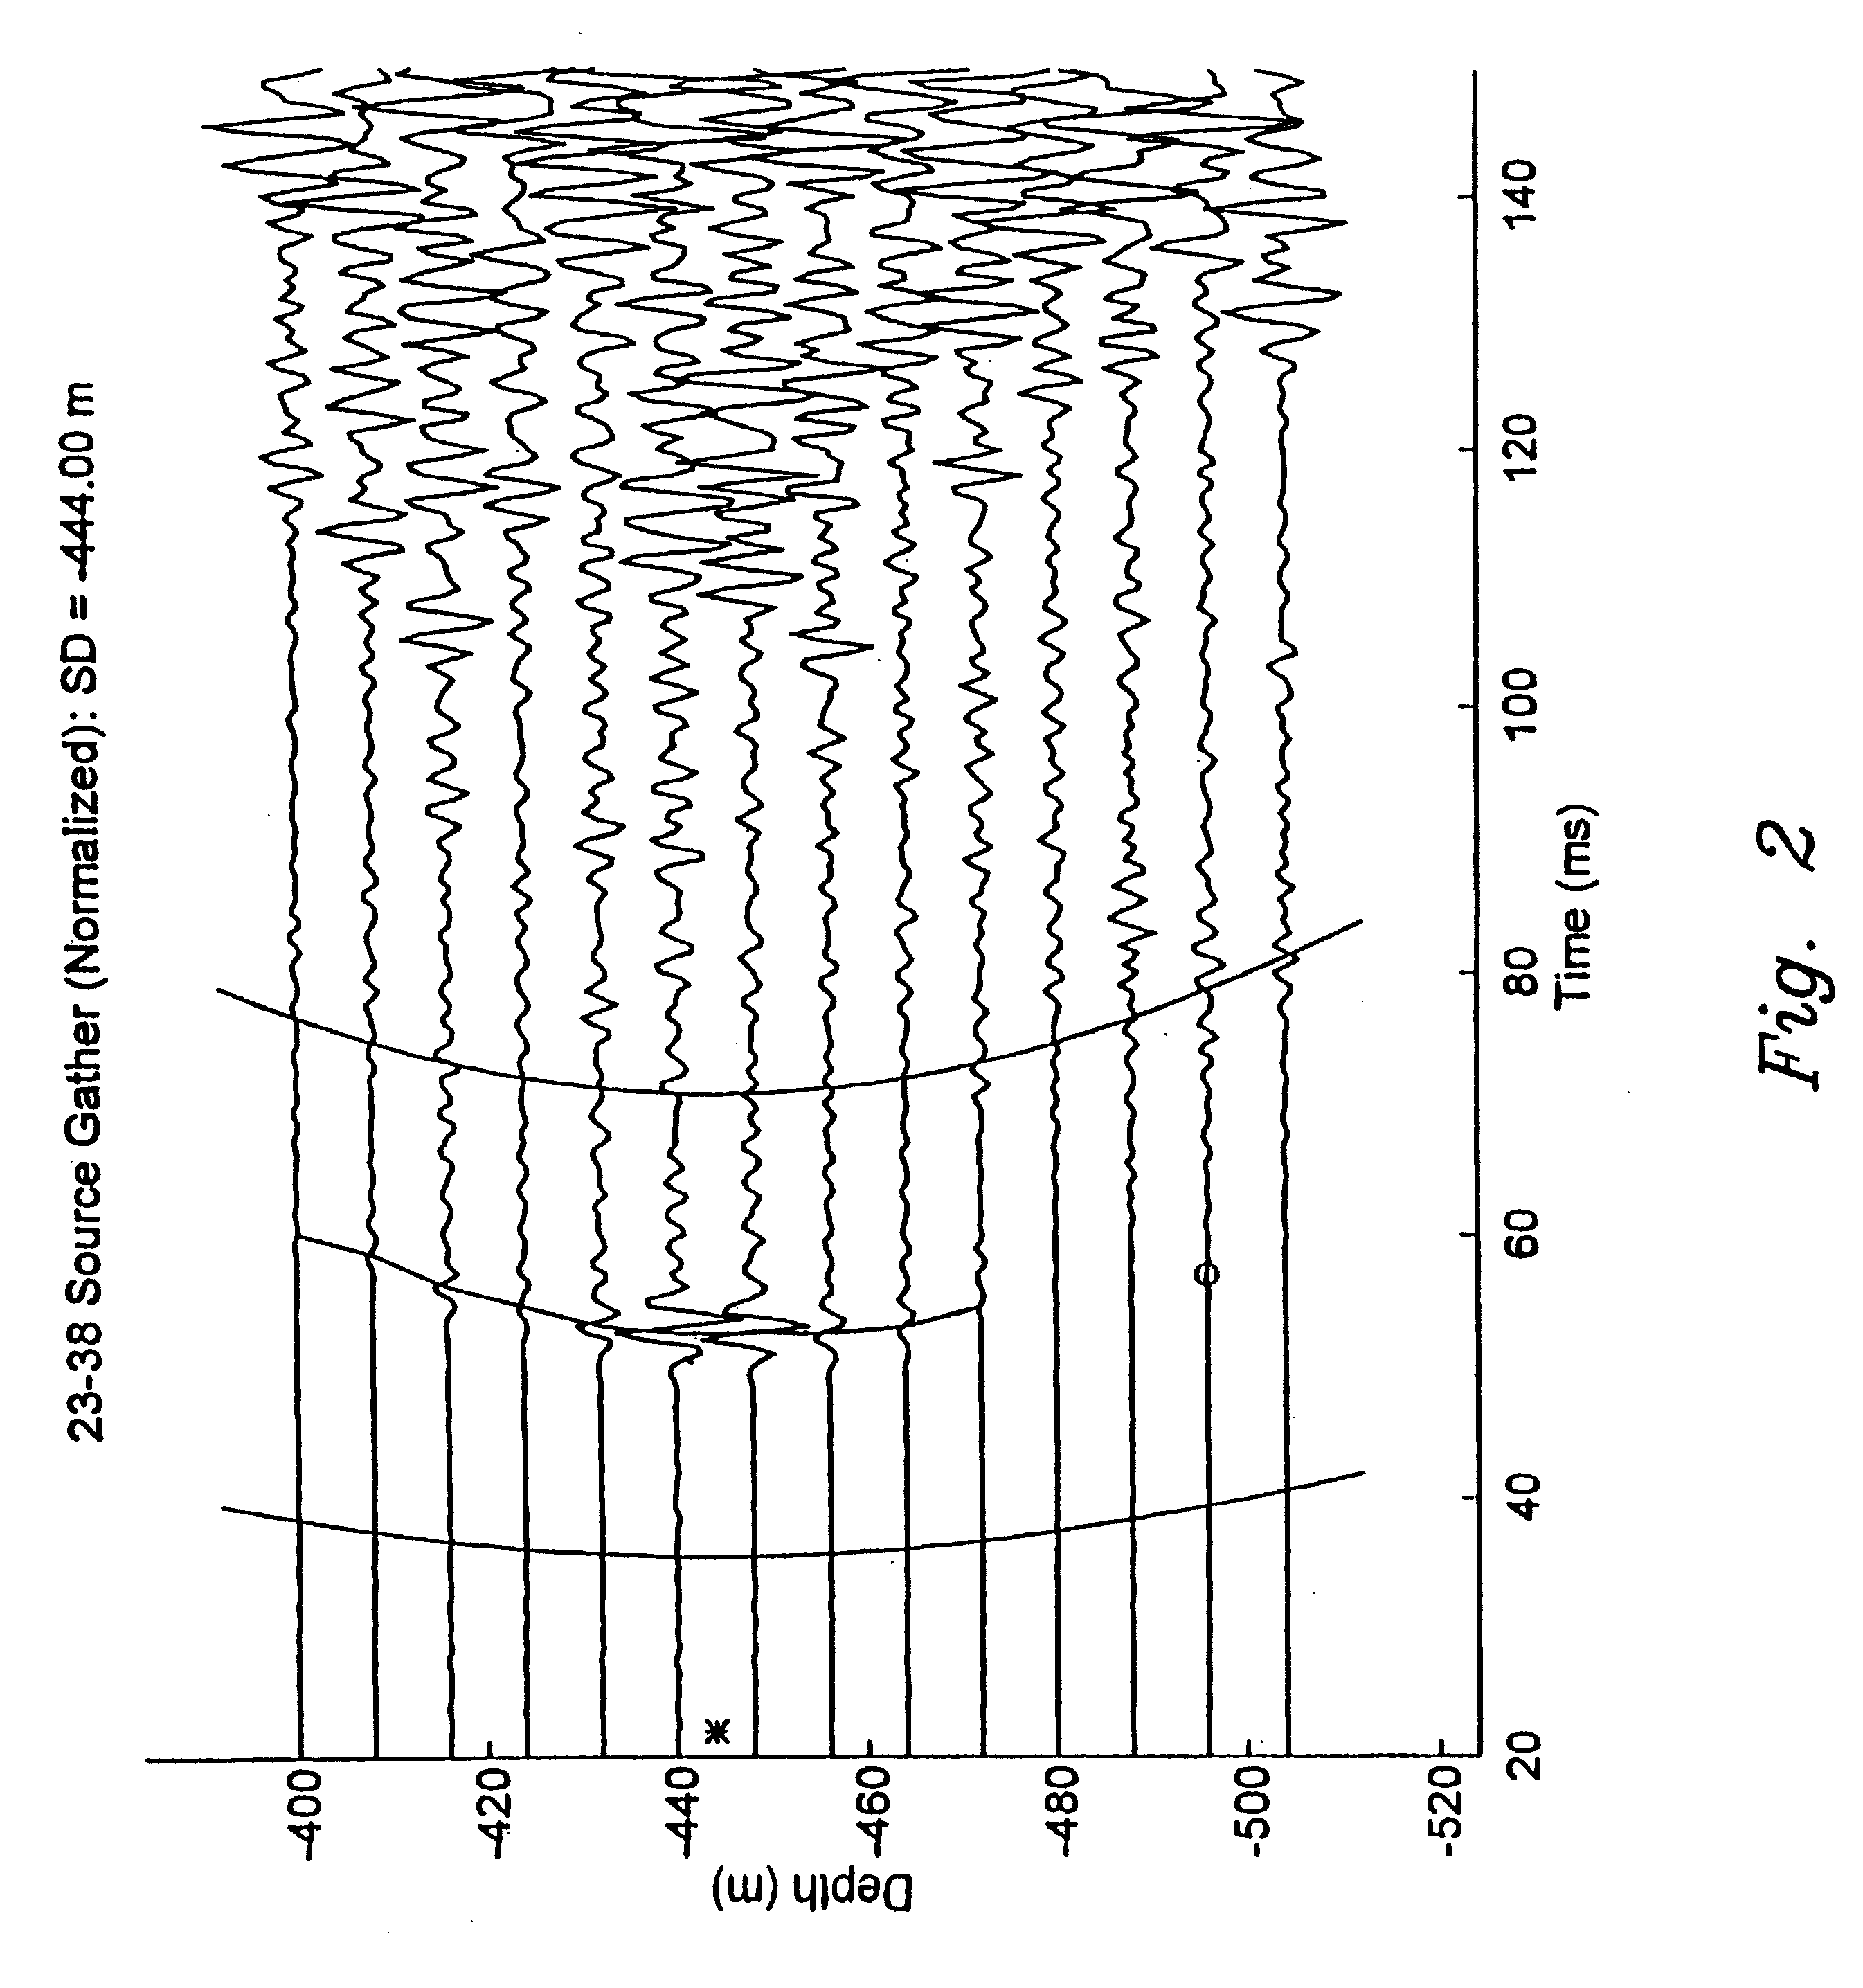 Method of imaging the permeability and fluid content structure within sediment